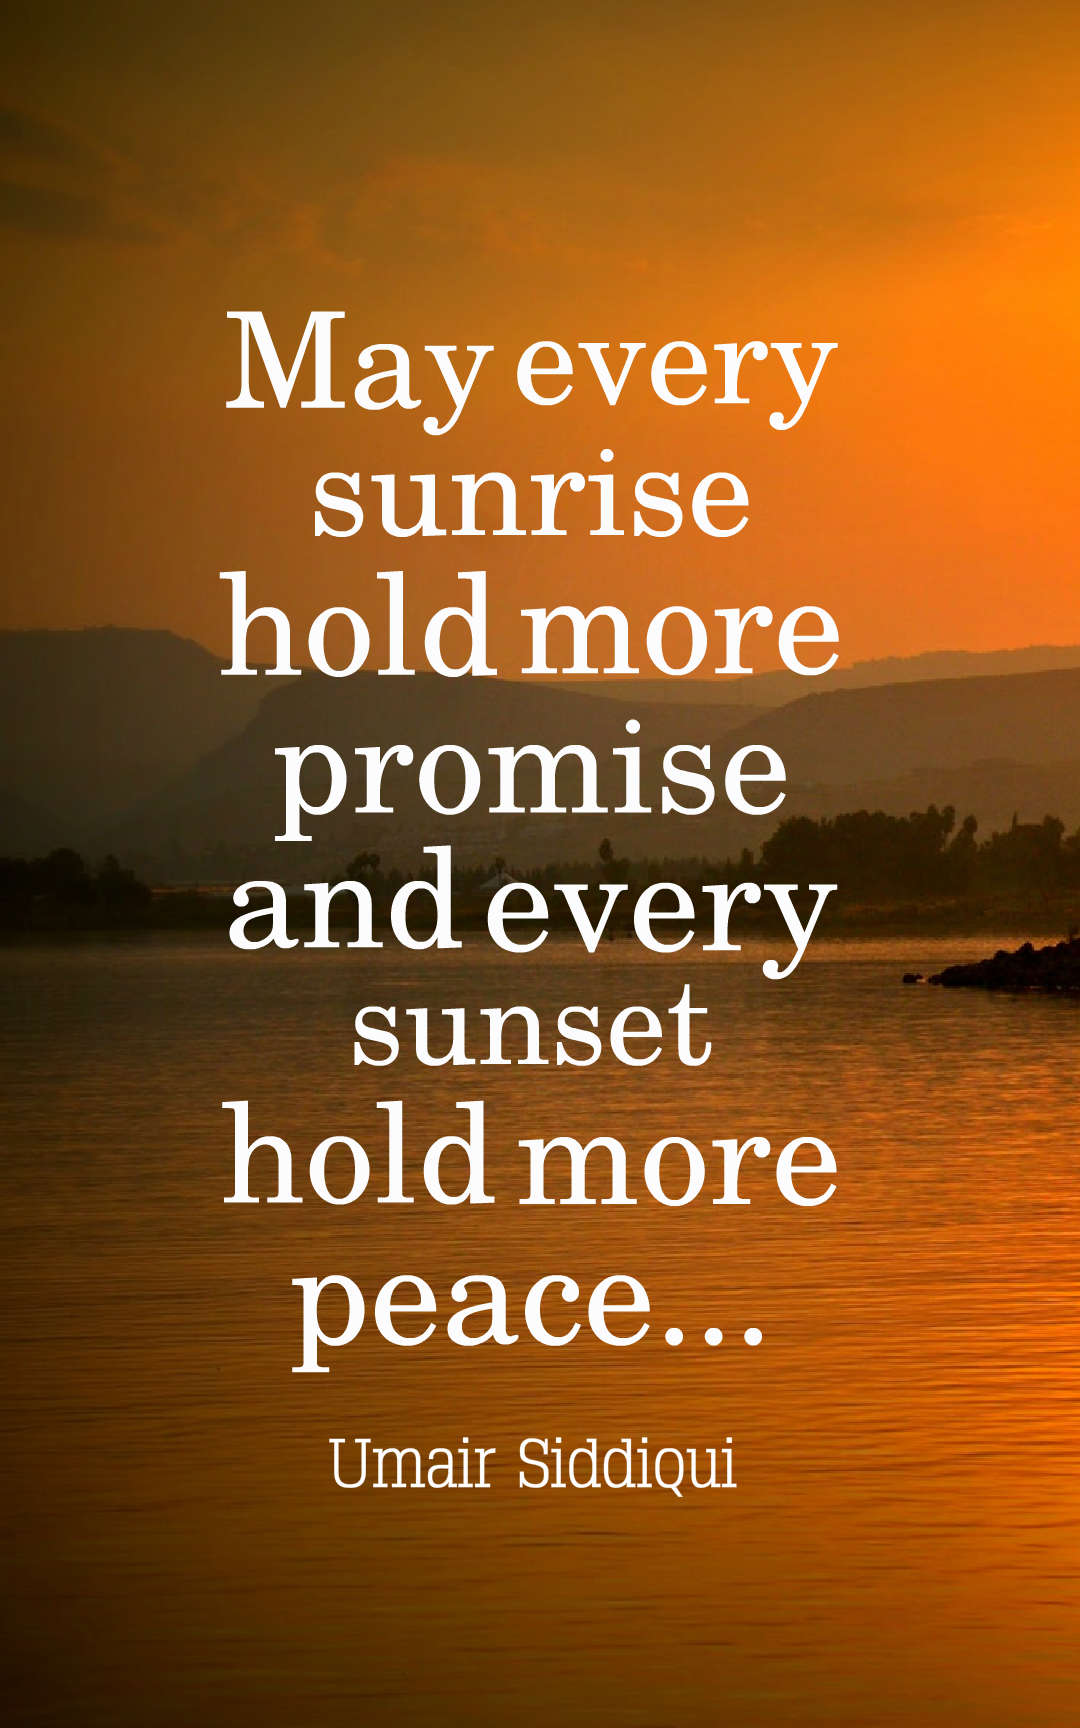 May every sunrise hold more promise and every sunset hold more peace..